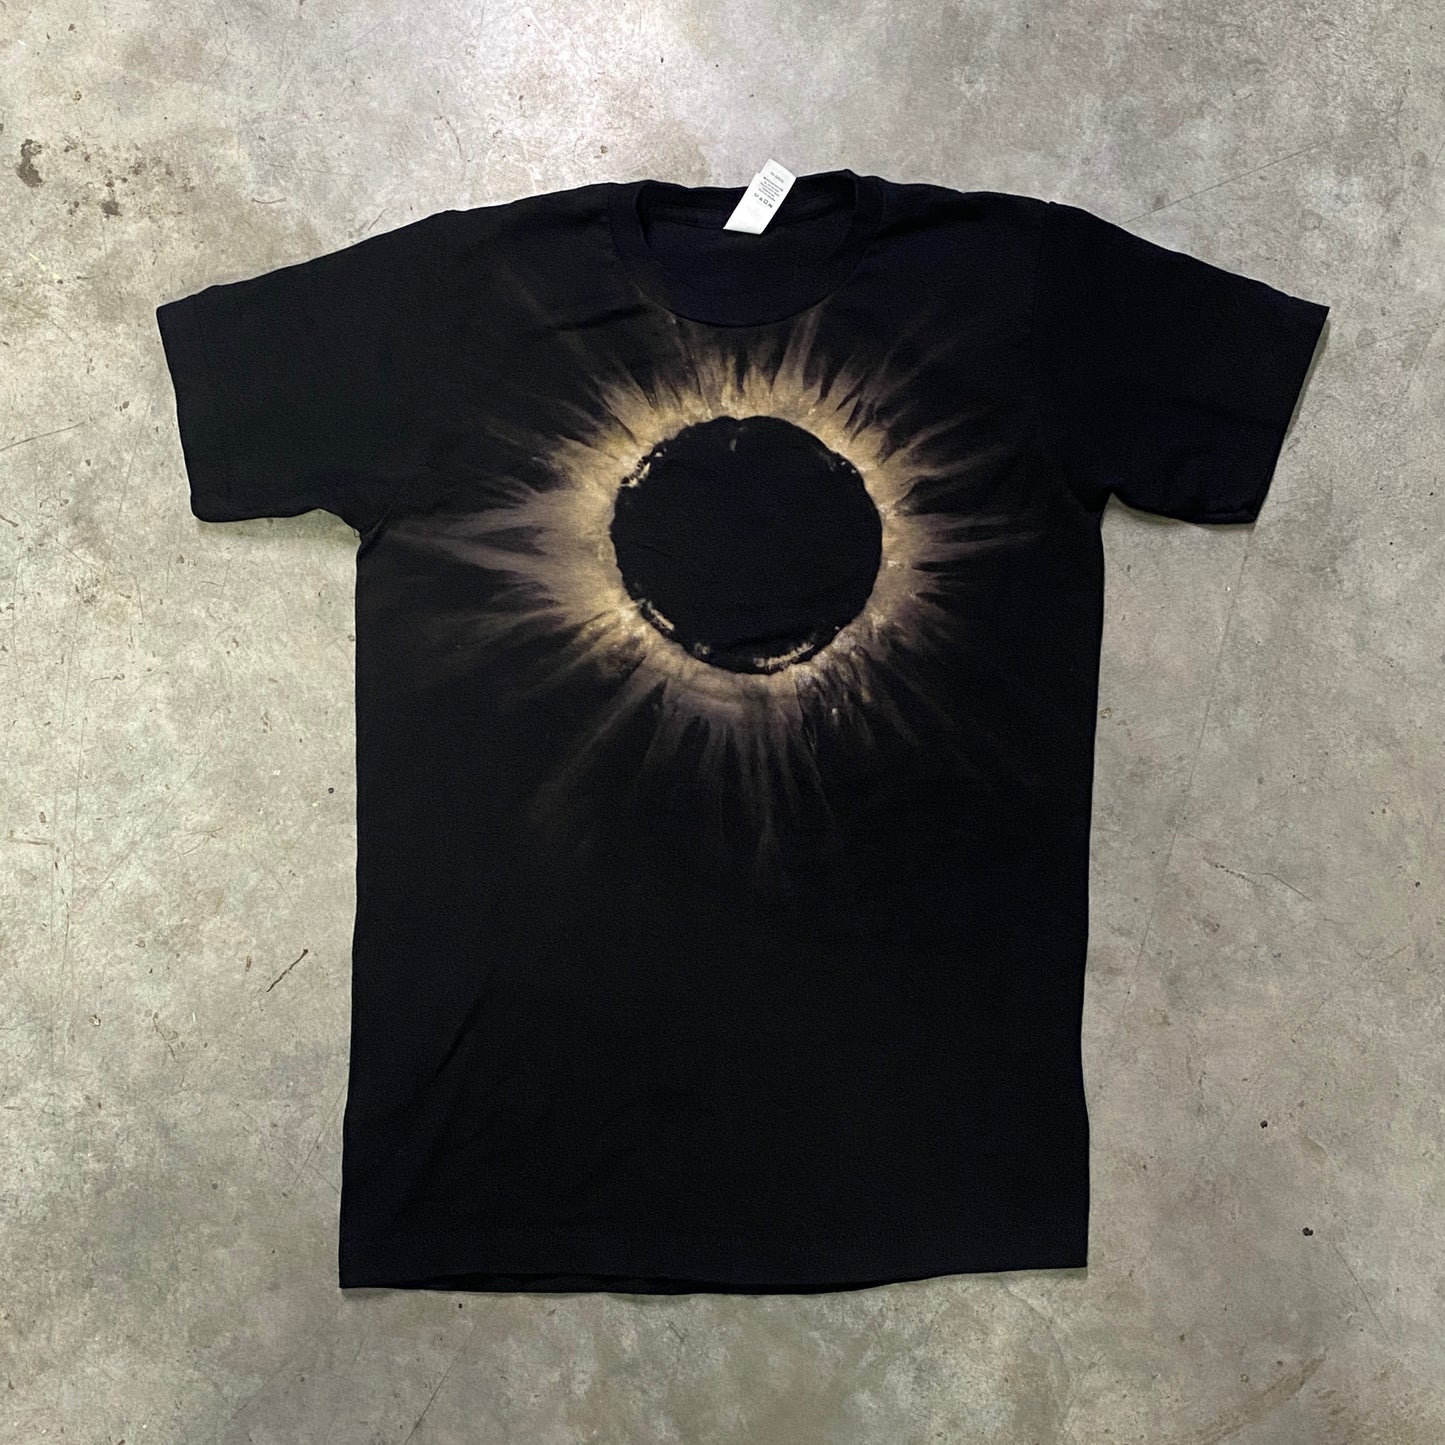 Totality Eclipse Tops